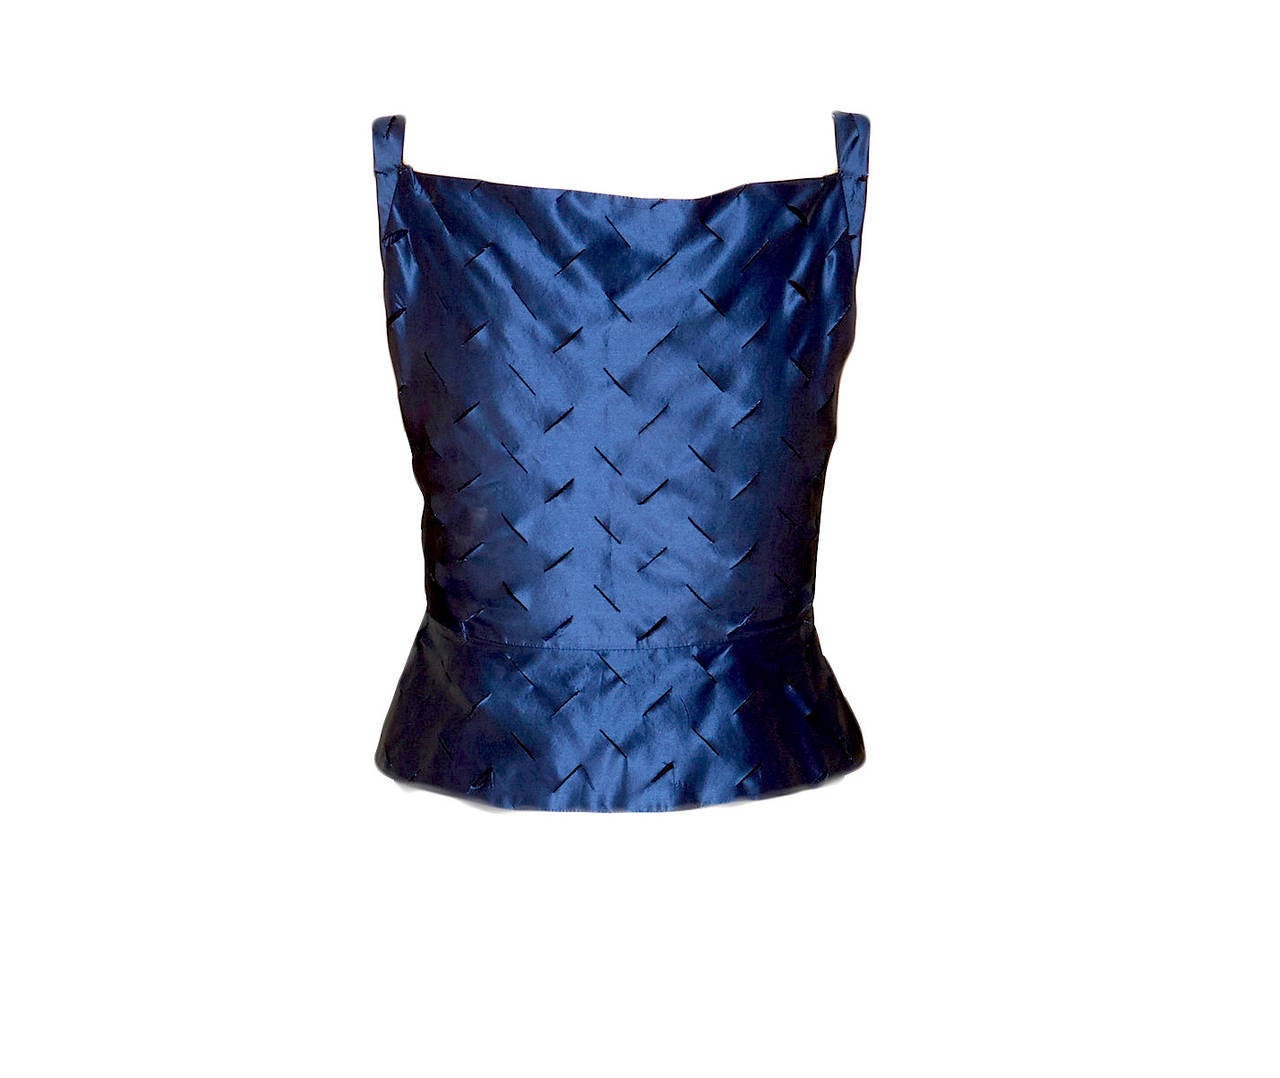 Vivienne Westwood Anglomania deep blue sleeves corset top (no boning) with criss cross pleating and cut outs. Hidden front closure.
Measurements: Shoulder to hem 18.5